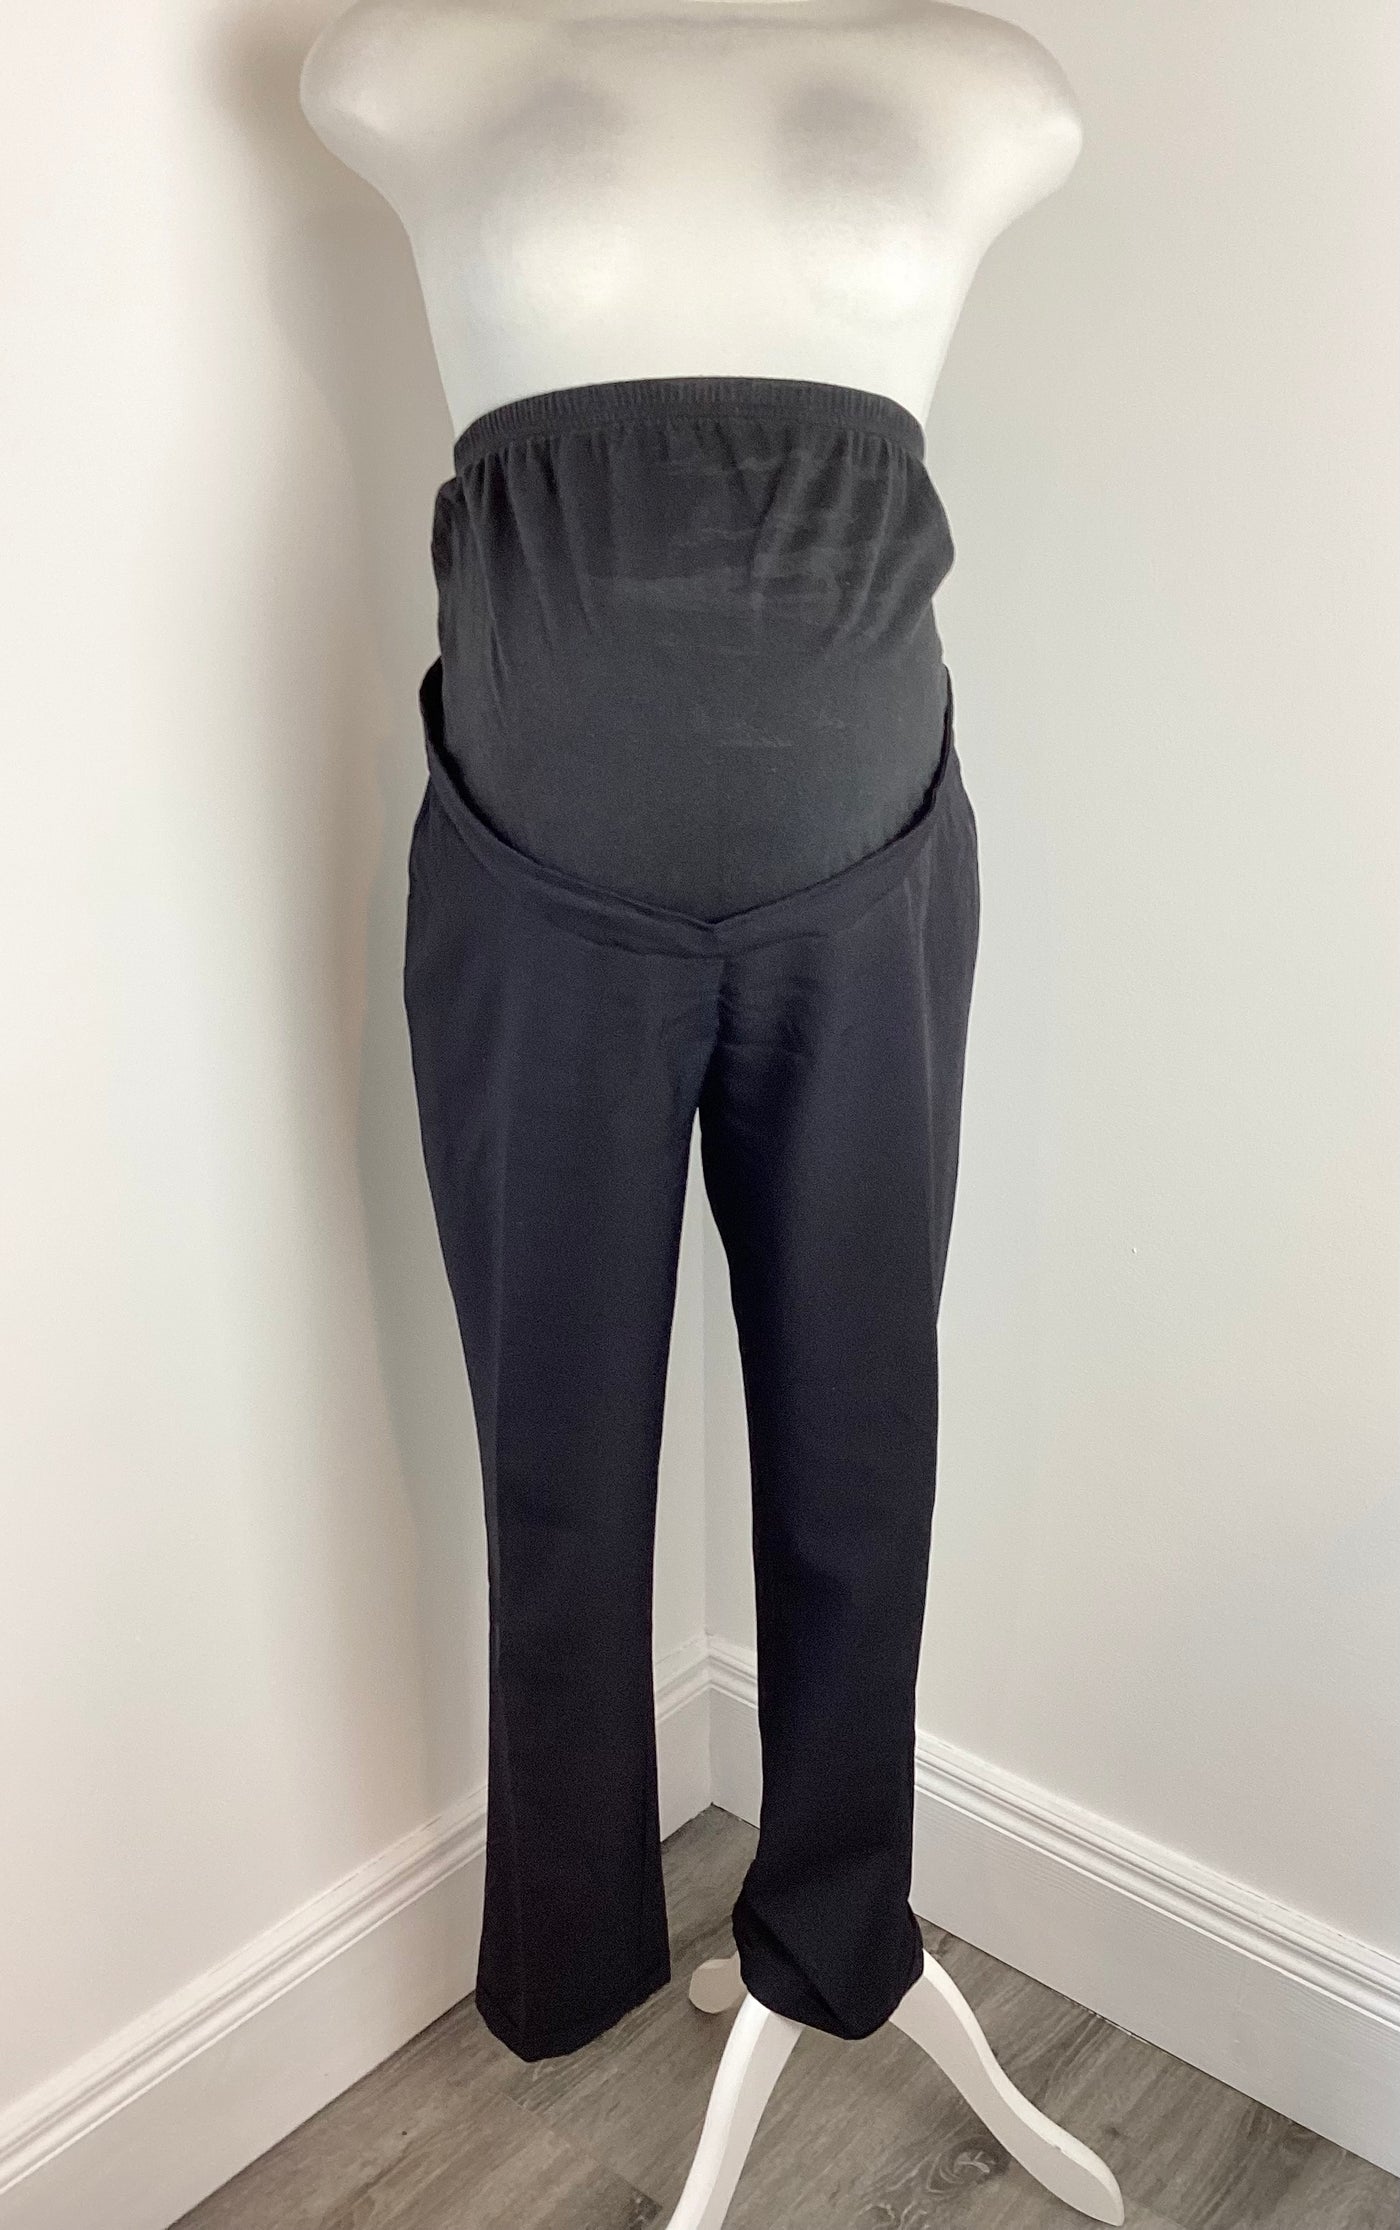 New Look Maternity black overbump trousers with turnup bottom - Size 14